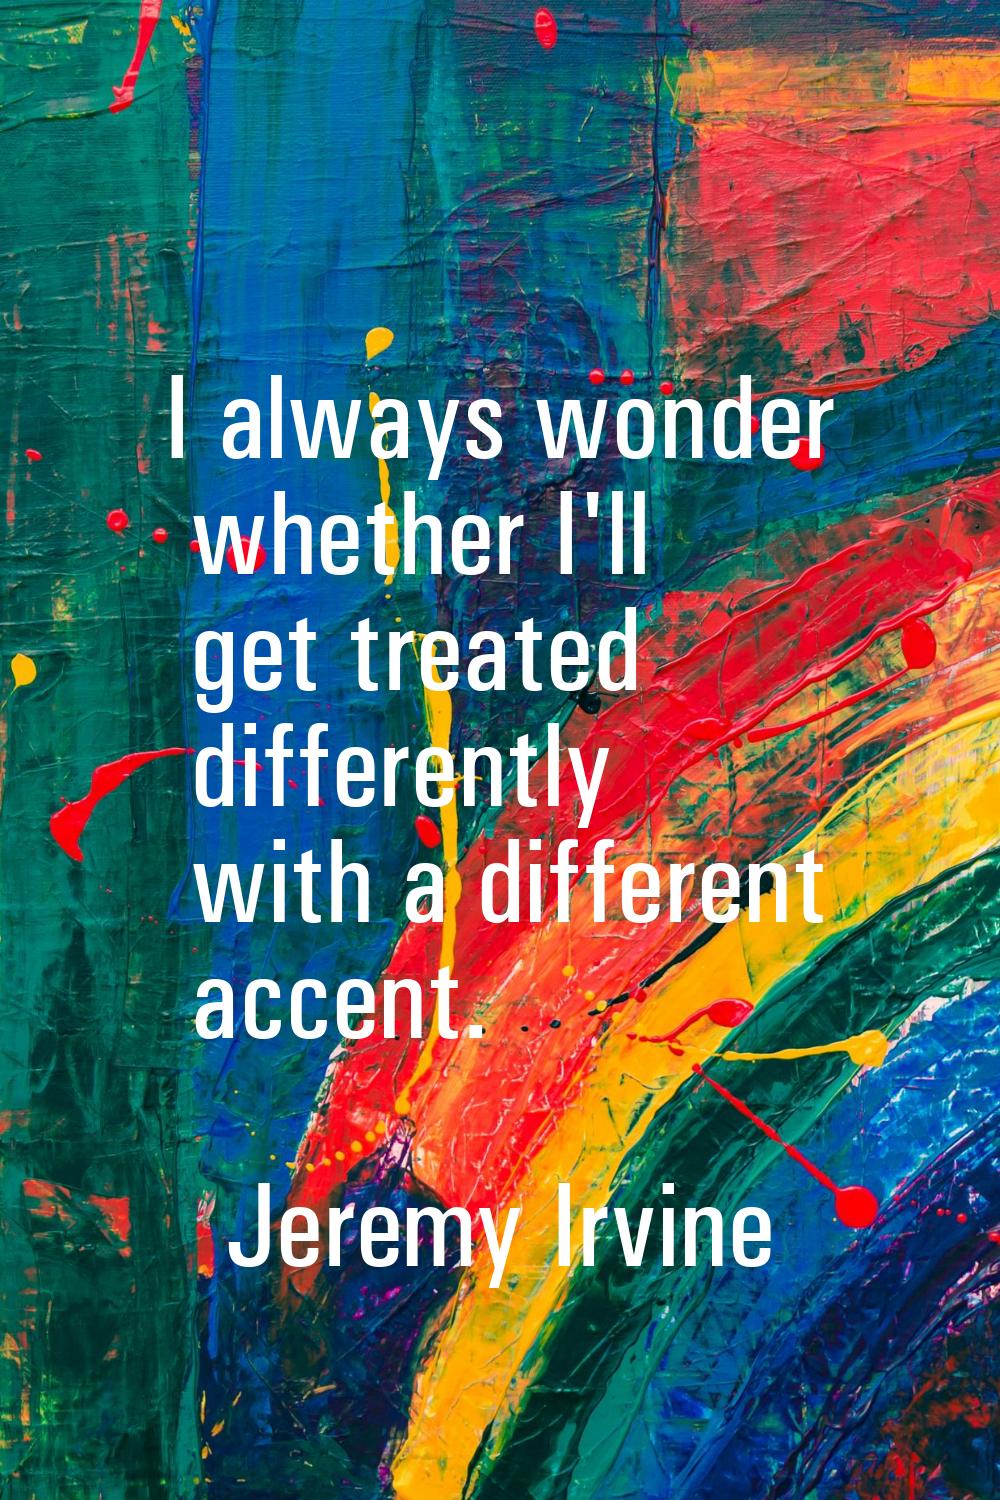 I always wonder whether I'll get treated differently with a different accent.